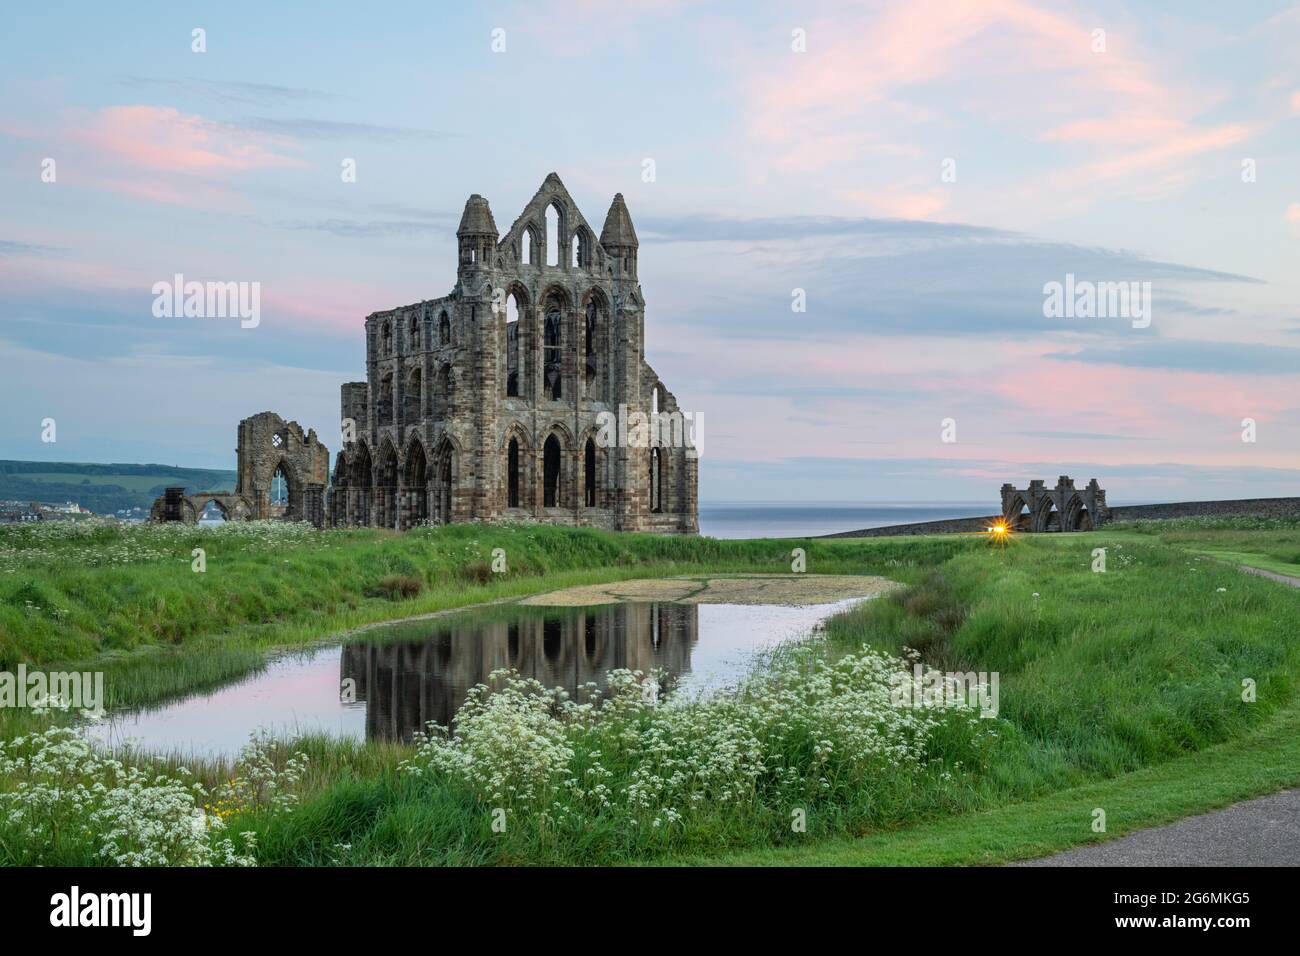 Whitby Abbey at sunrise reflected in the pond Stock Photo